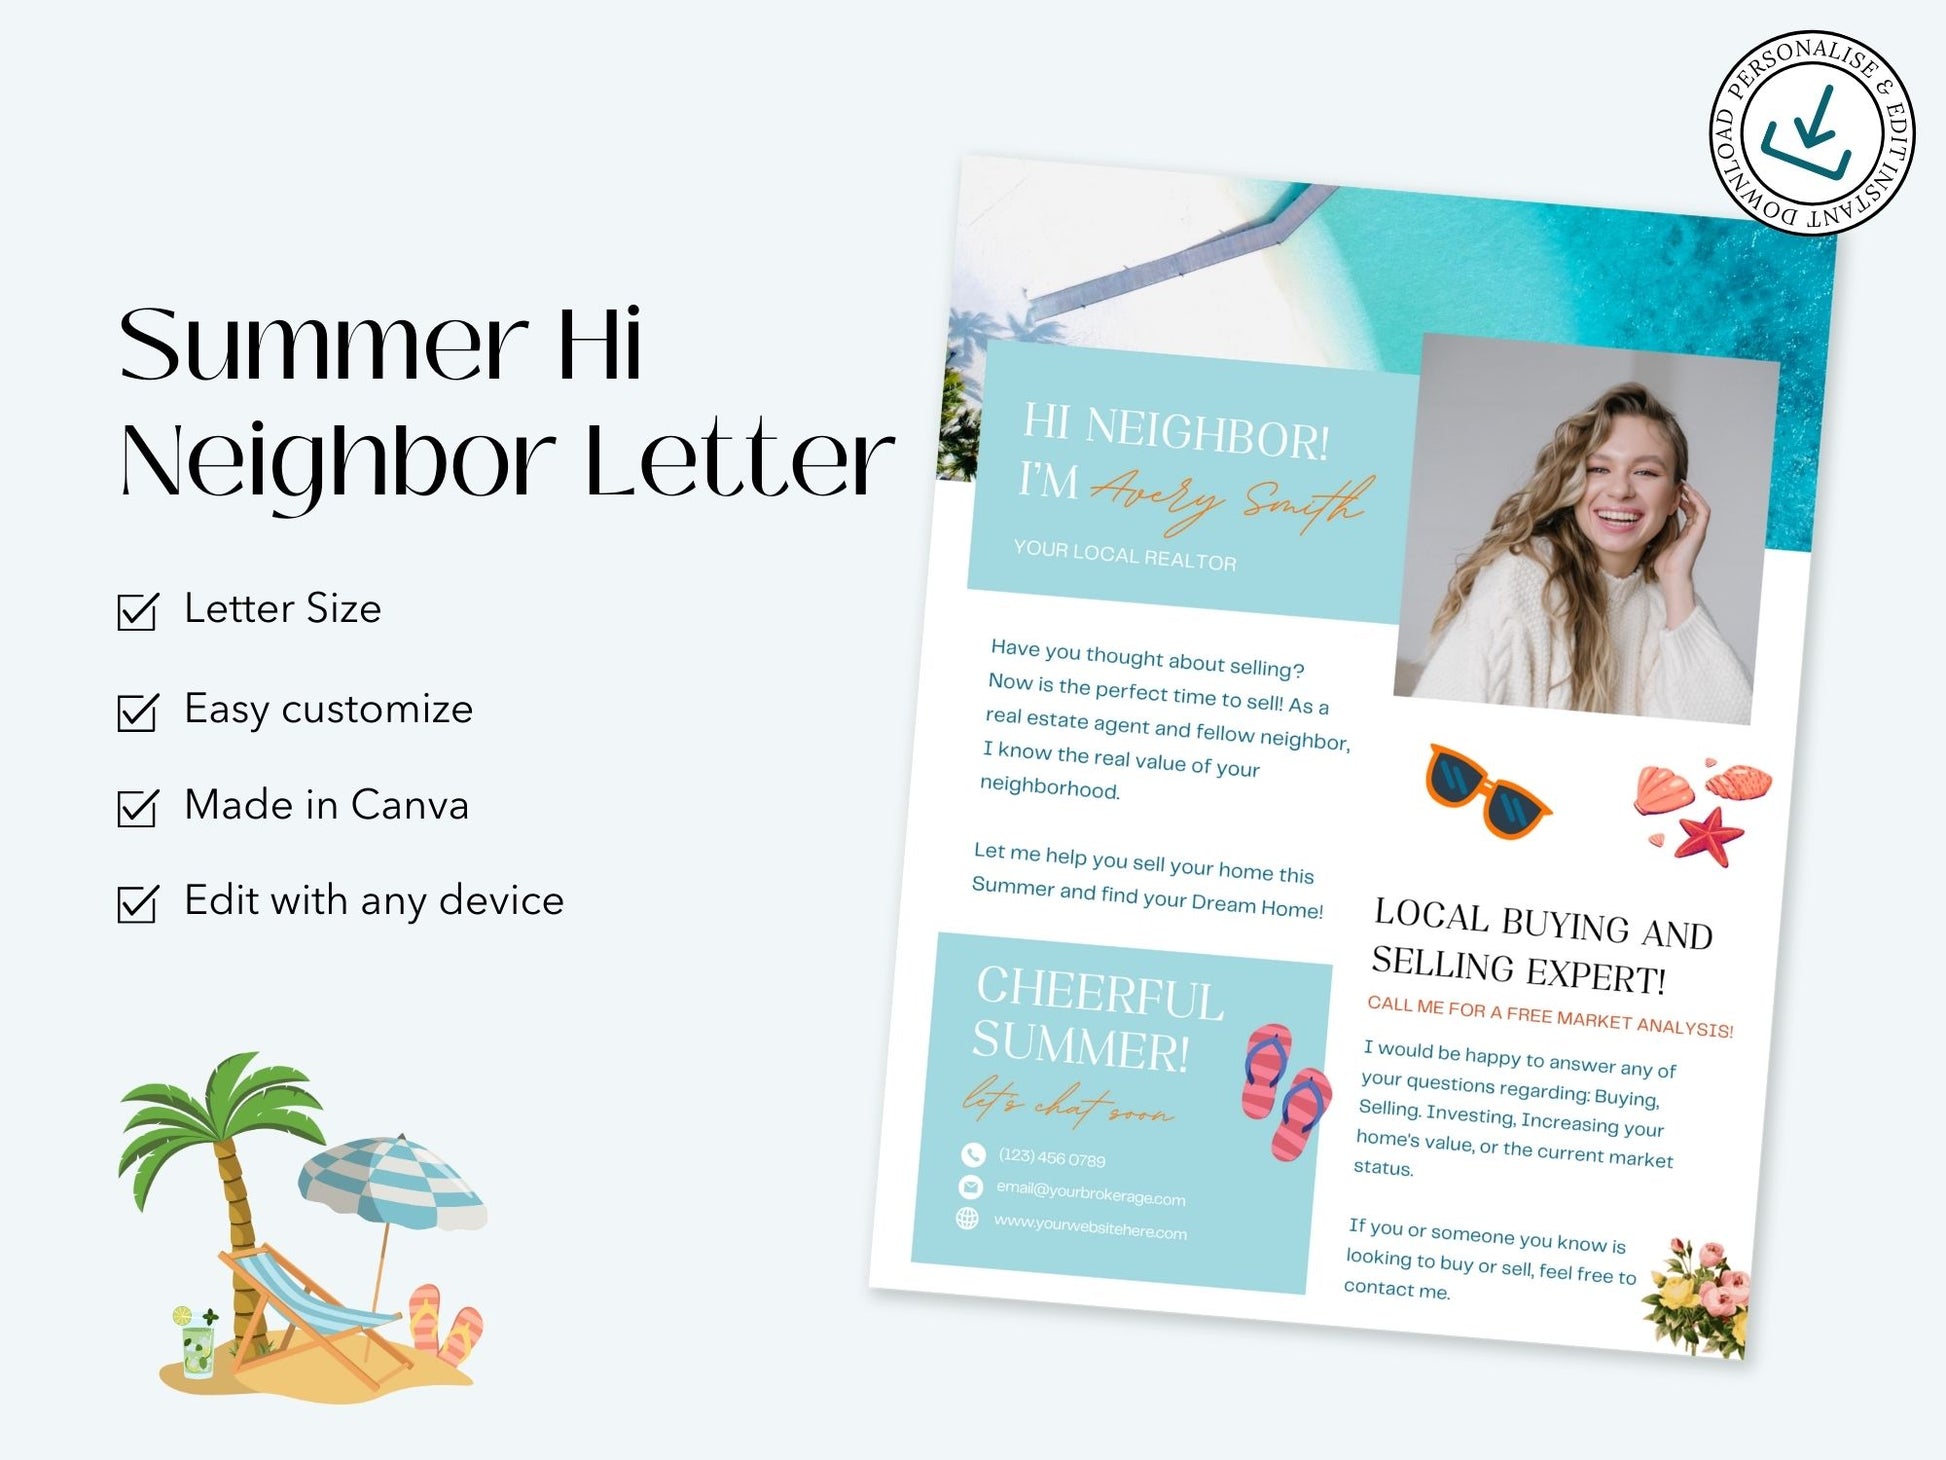 Summer Hi Neighbor Letter - Foster a sense of community in your neighborhood with our friendly letter.